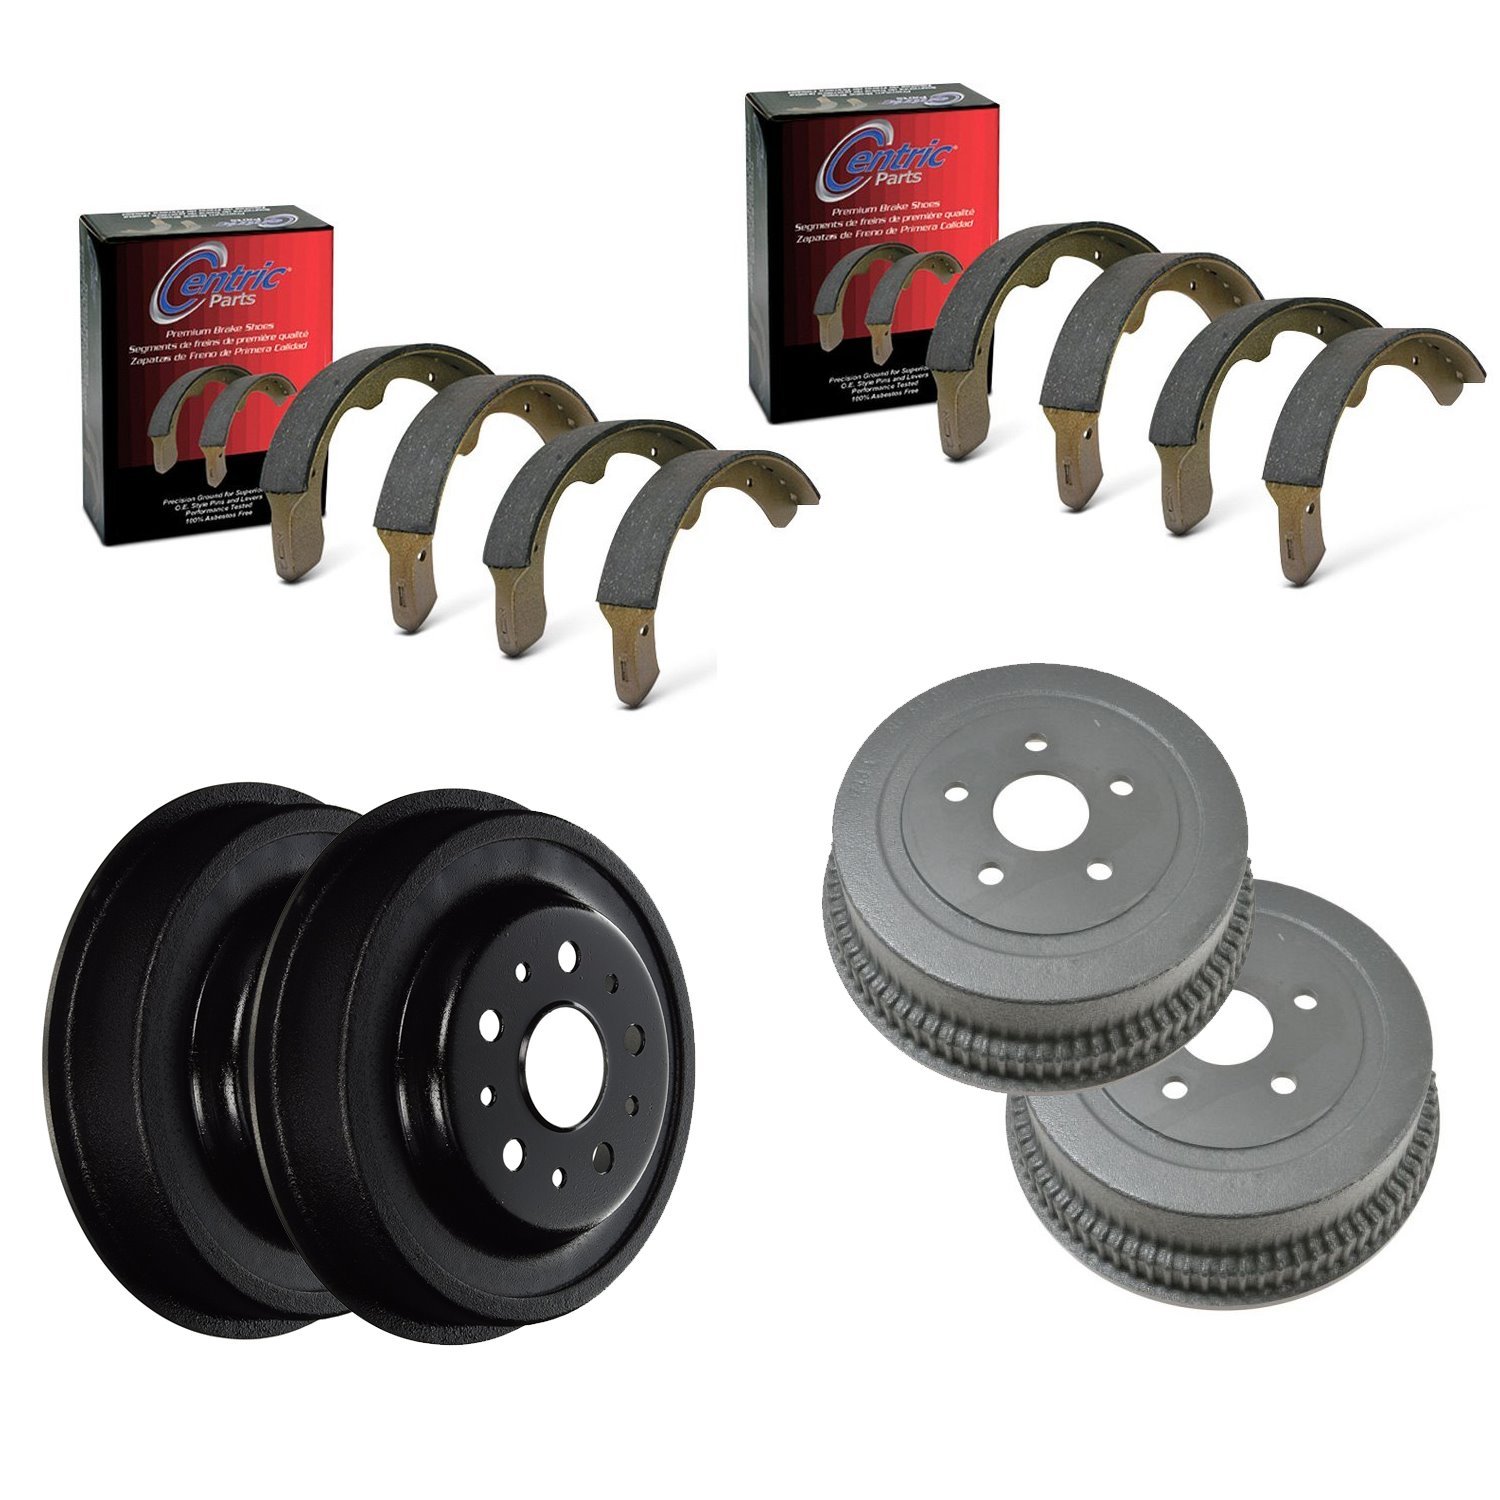 Centric Front Drum/Rear Drum Brake Kit for 1964-1971 Ford Mustang